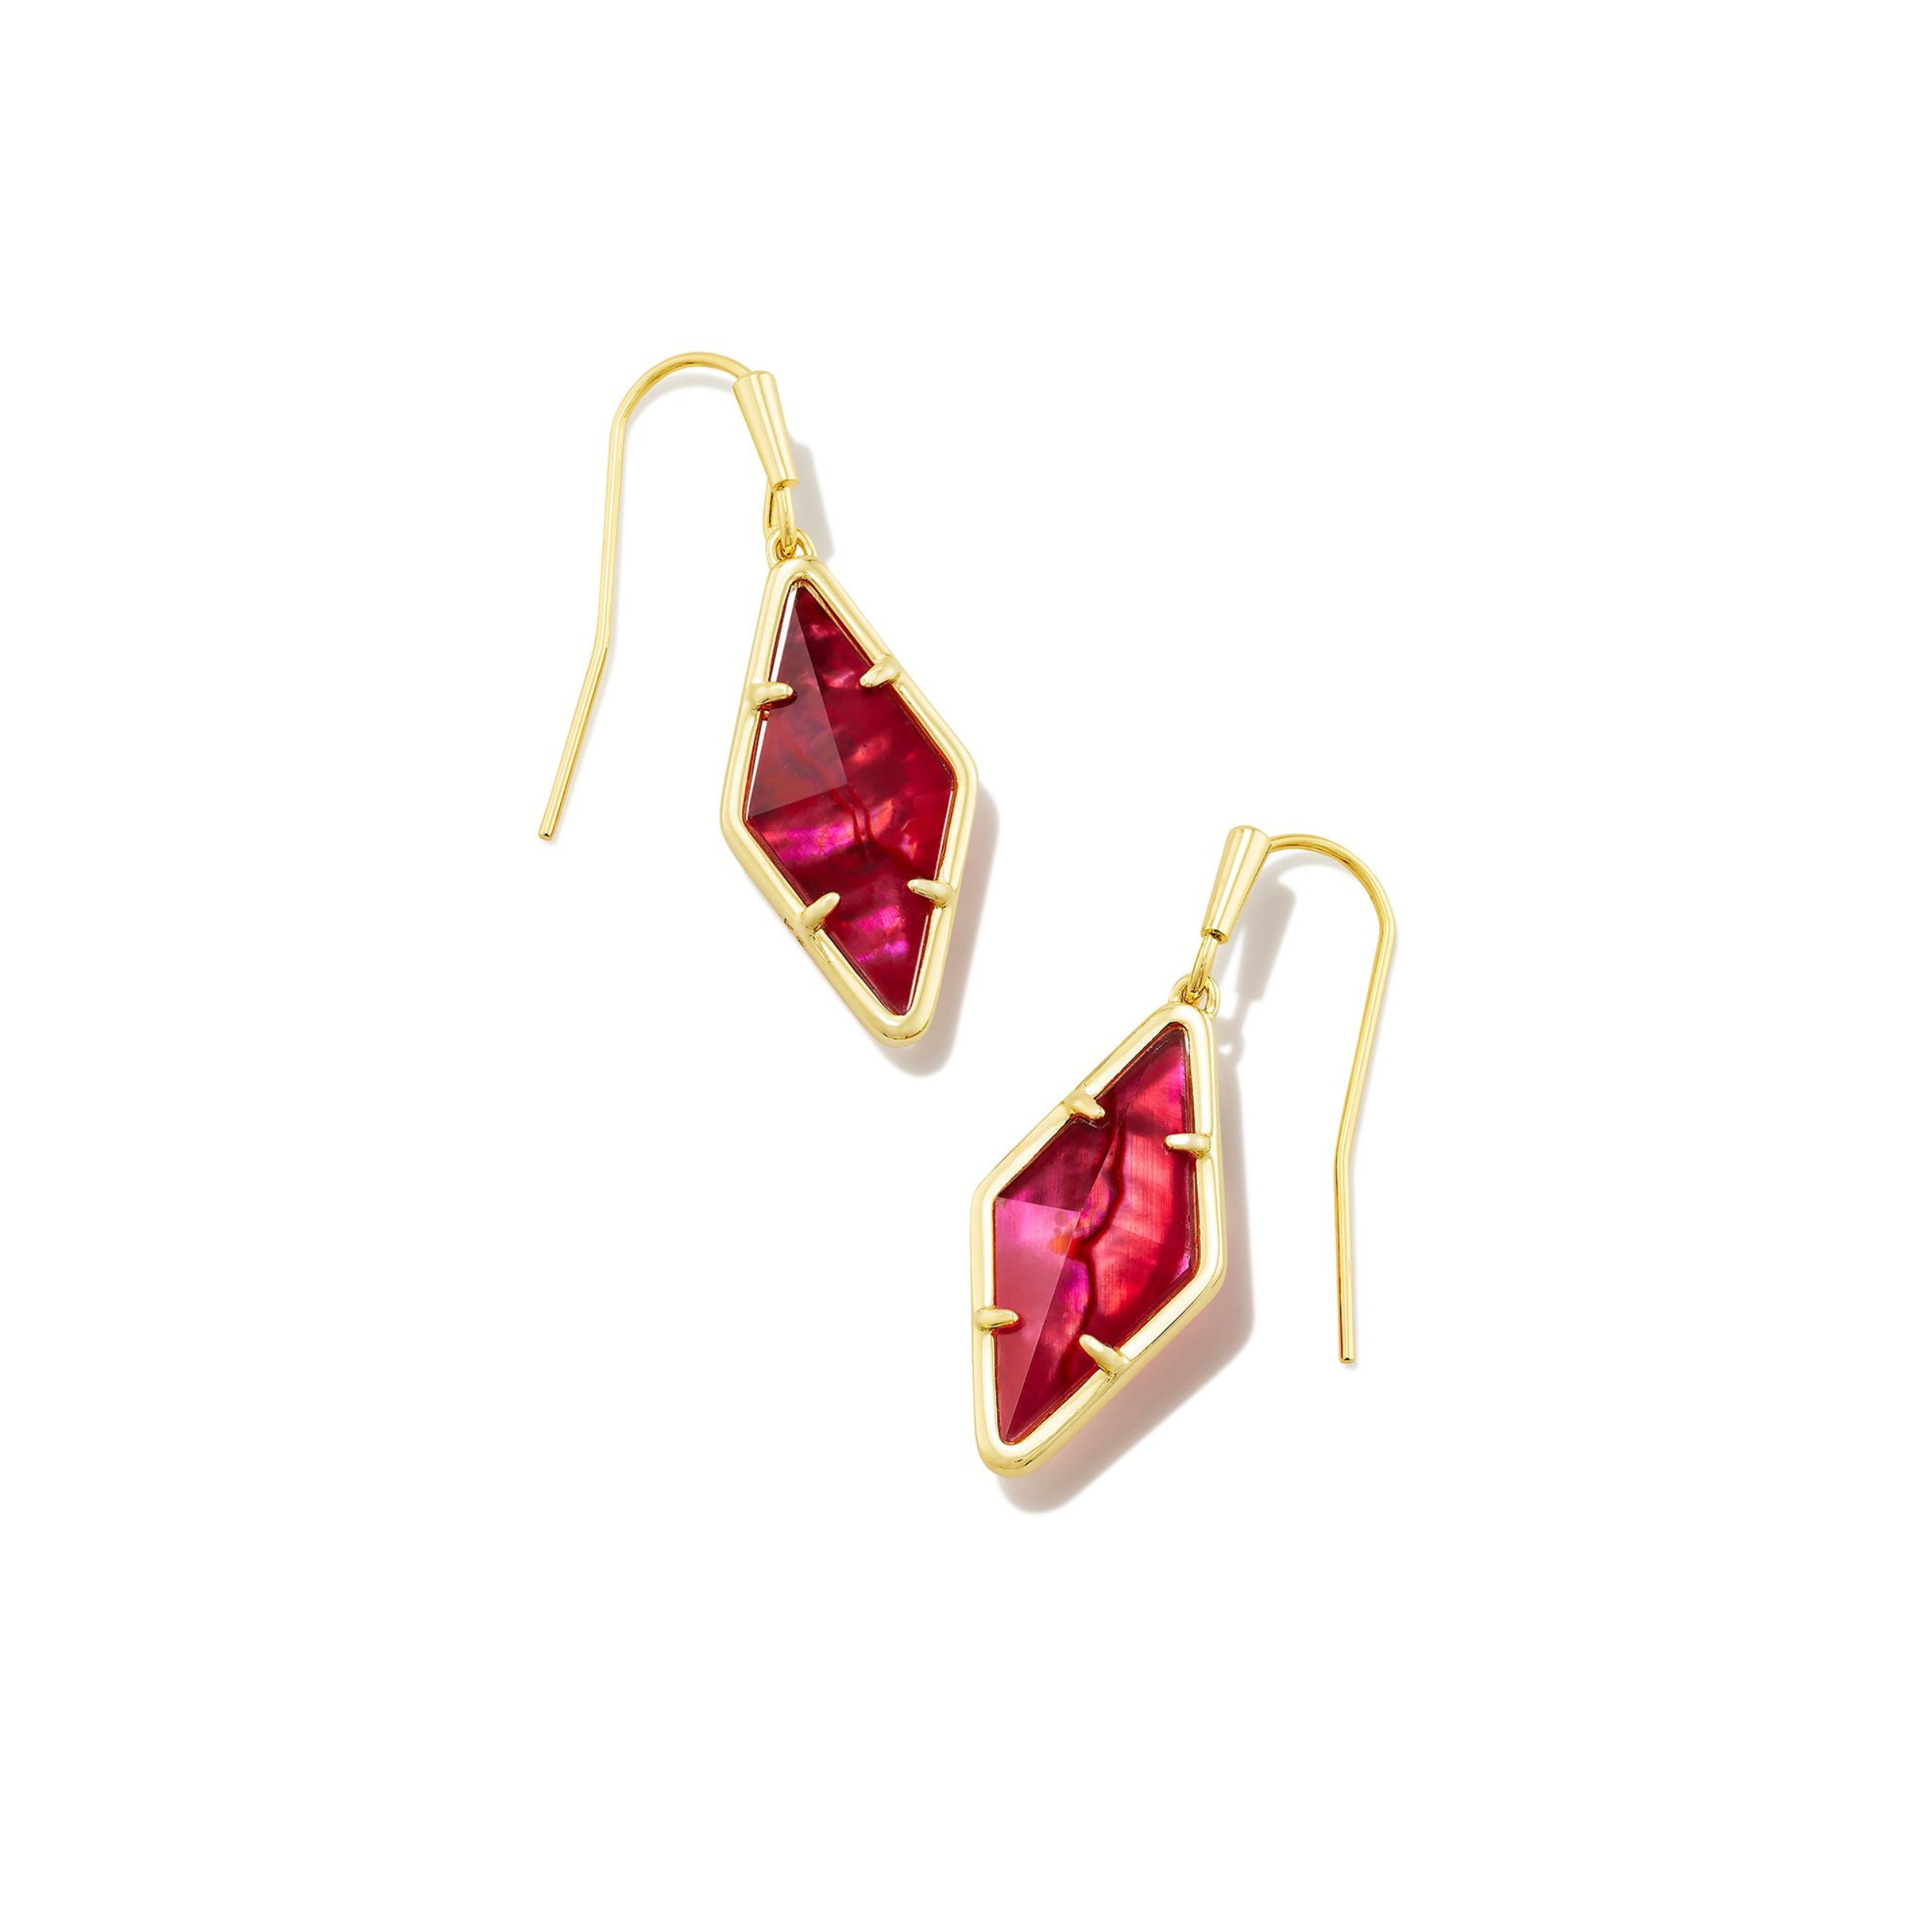 Gold, fish hook diamond drop earrings with a raspberry illusion stone pictured on a white background.